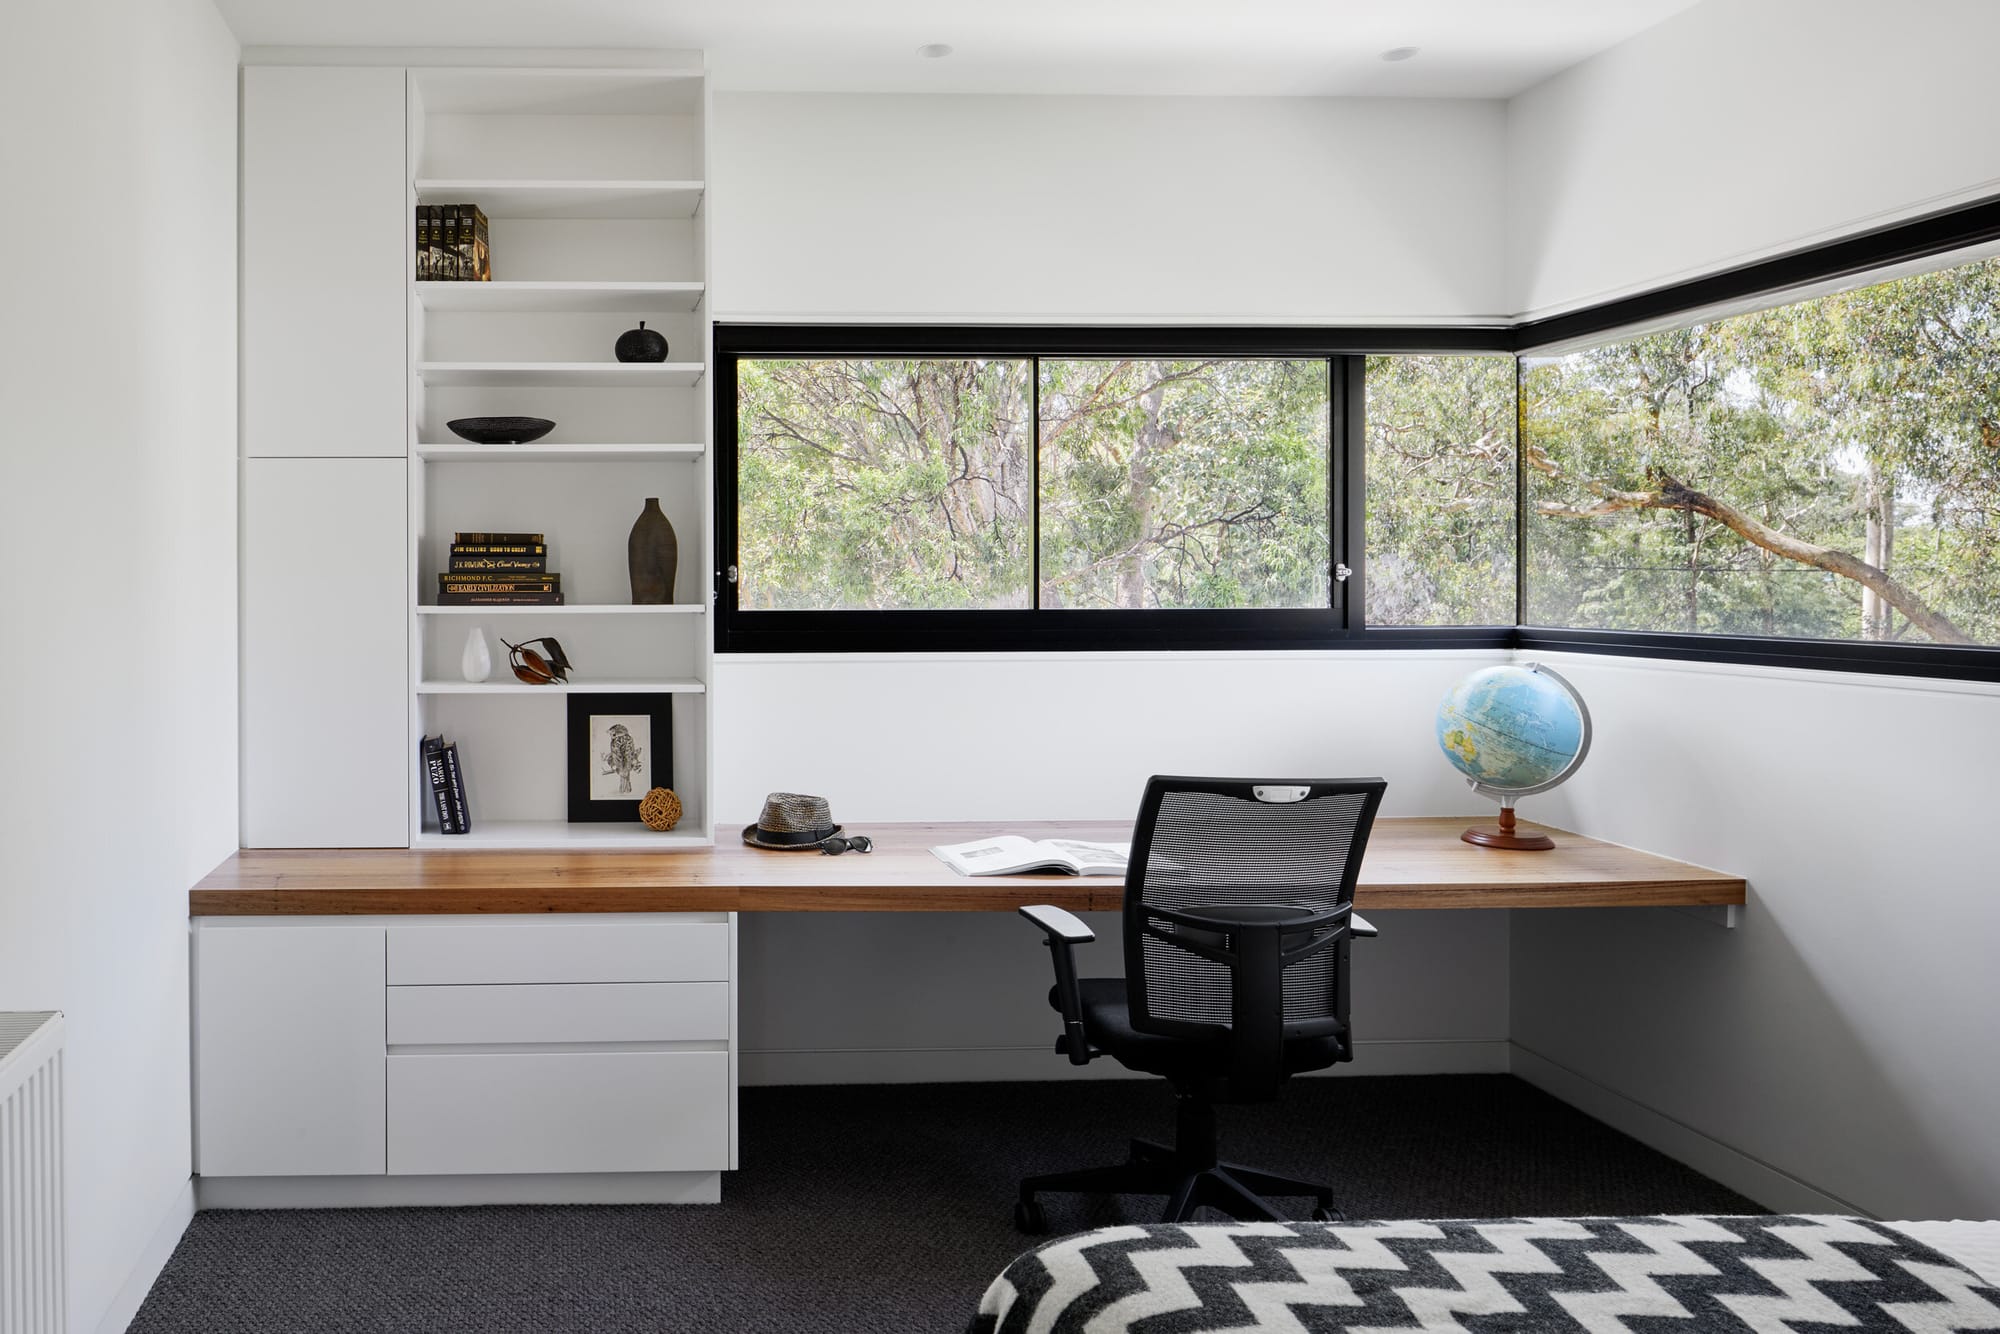 Laurel Grove by Kirsten Johnstone Architecture. Photography by Tatjana Plitt. Second floor bedroom with integrated timber bench and storage underneath window, overlooking gum trees. 